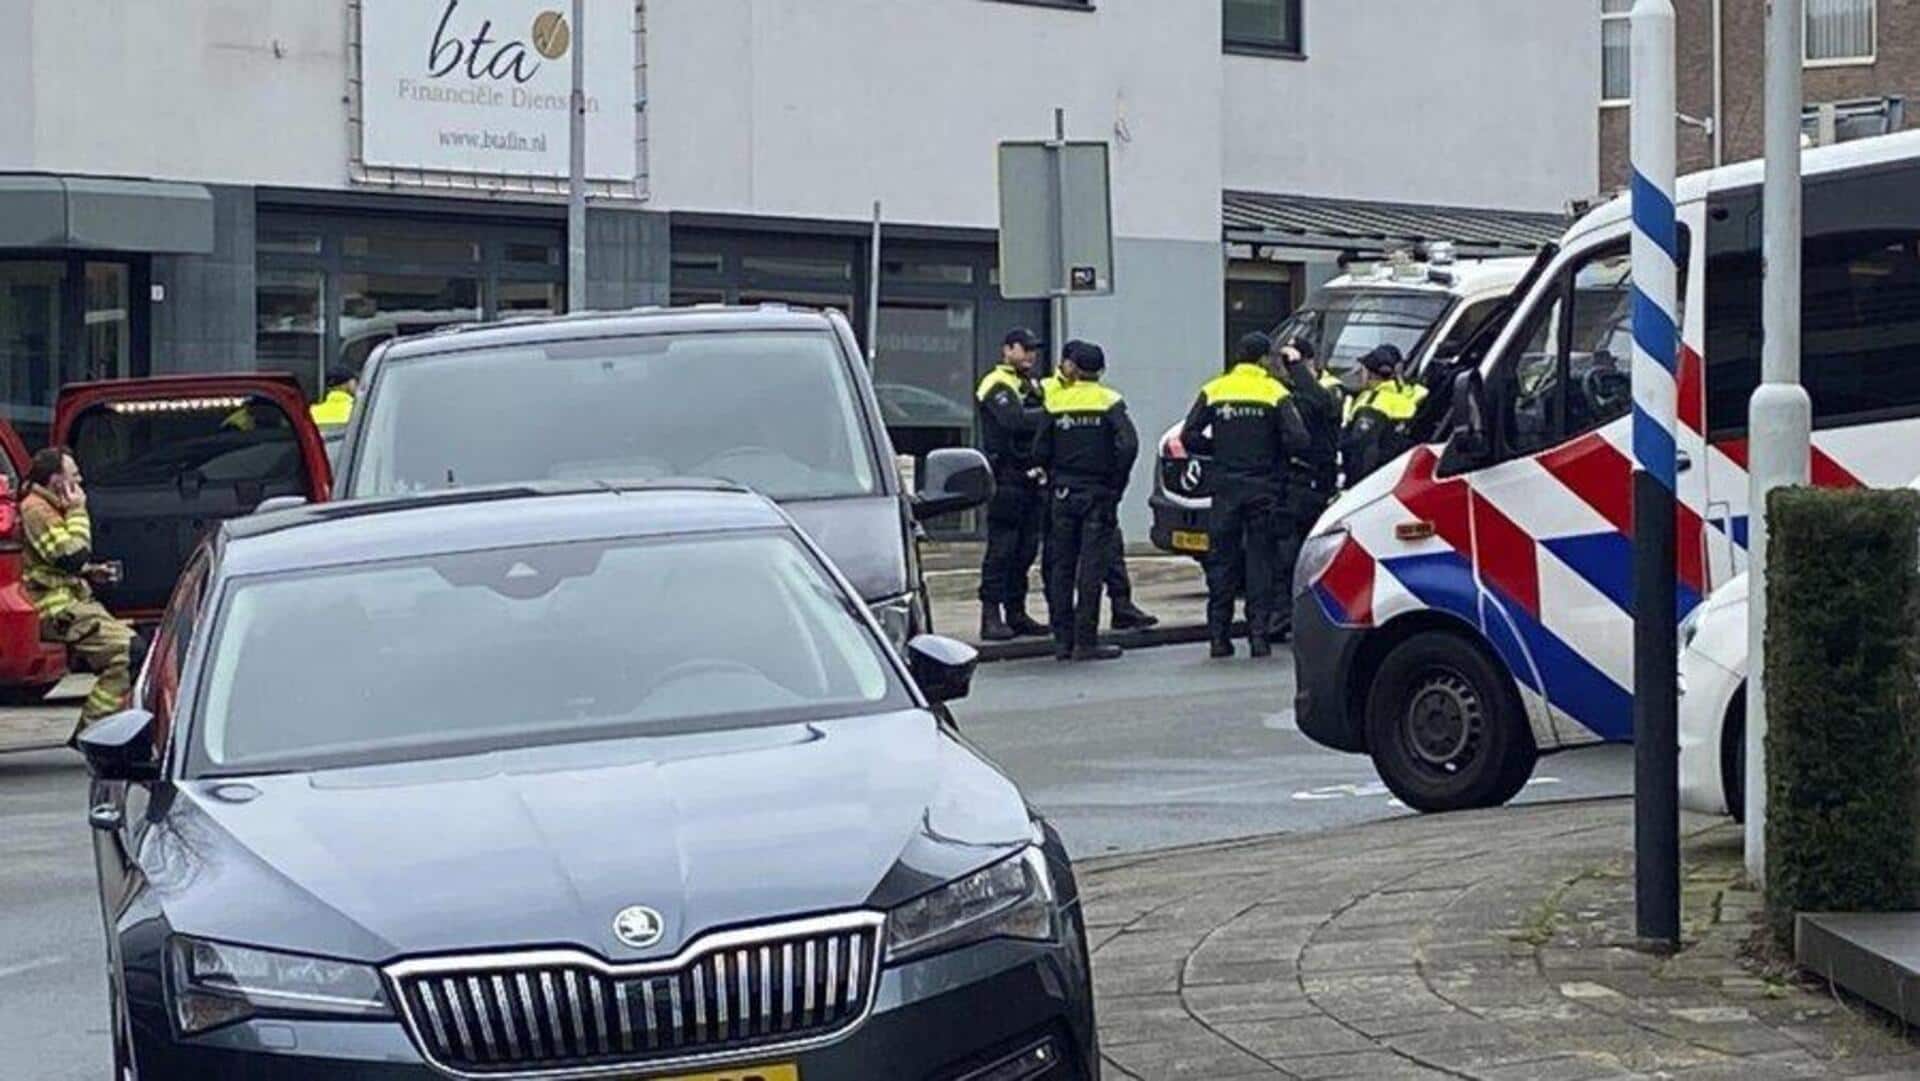 Tense hostage situation unfolds in Dutch town of Ede